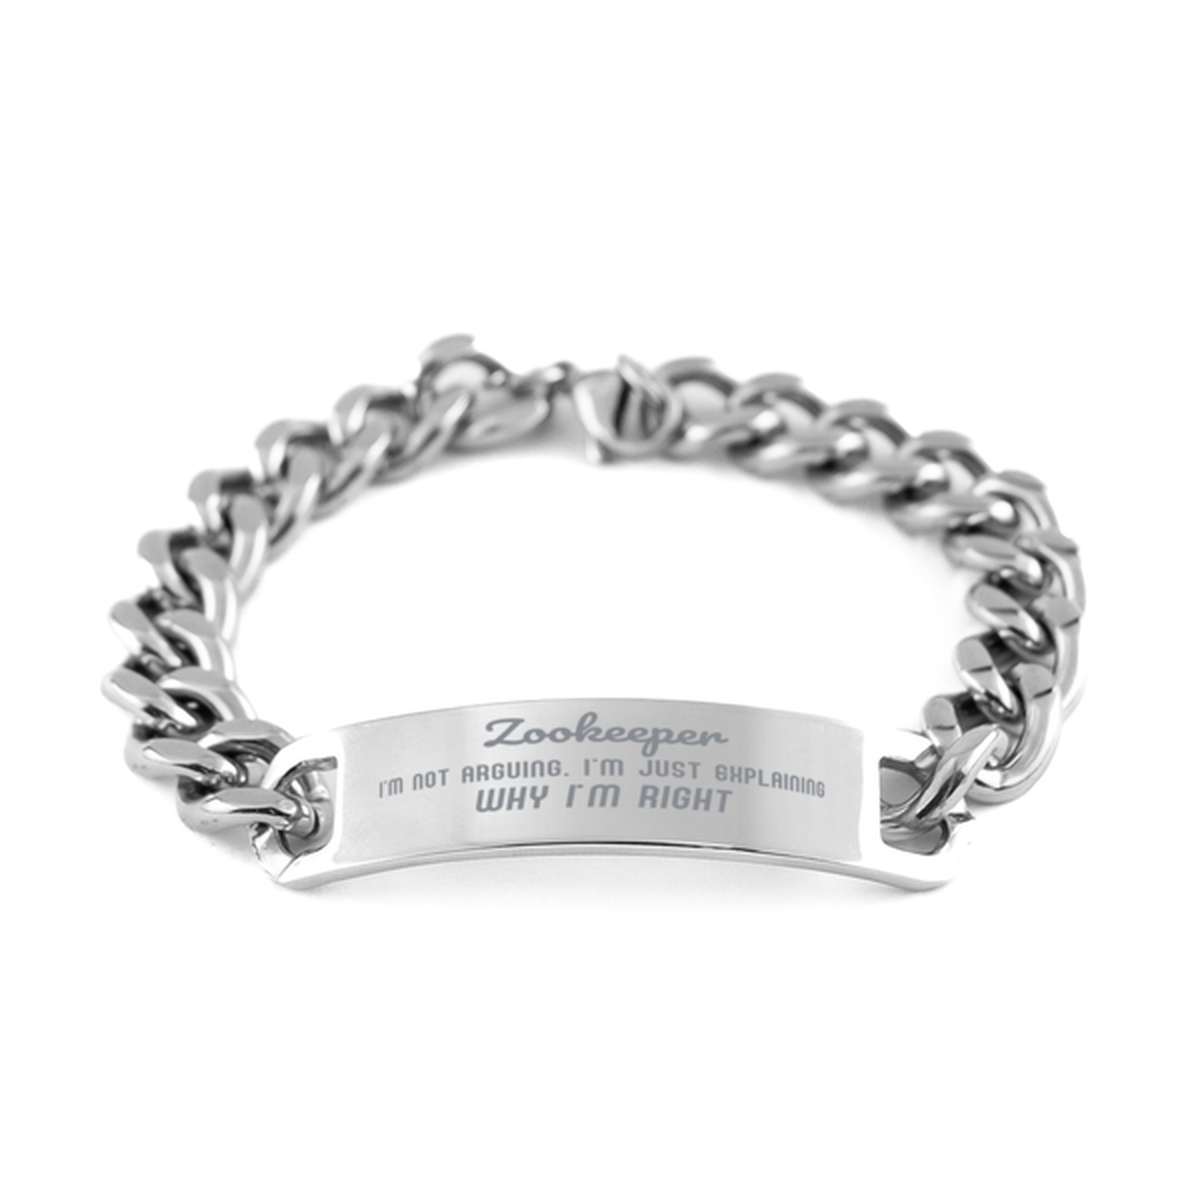 Zookeeper I'm not Arguing. I'm Just Explaining Why I'm RIGHT Cuban Chain Stainless Steel Bracelet, Graduation Birthday Christmas Zookeeper Gifts For Zookeeper Funny Saying Quote Present for Men Women Coworker